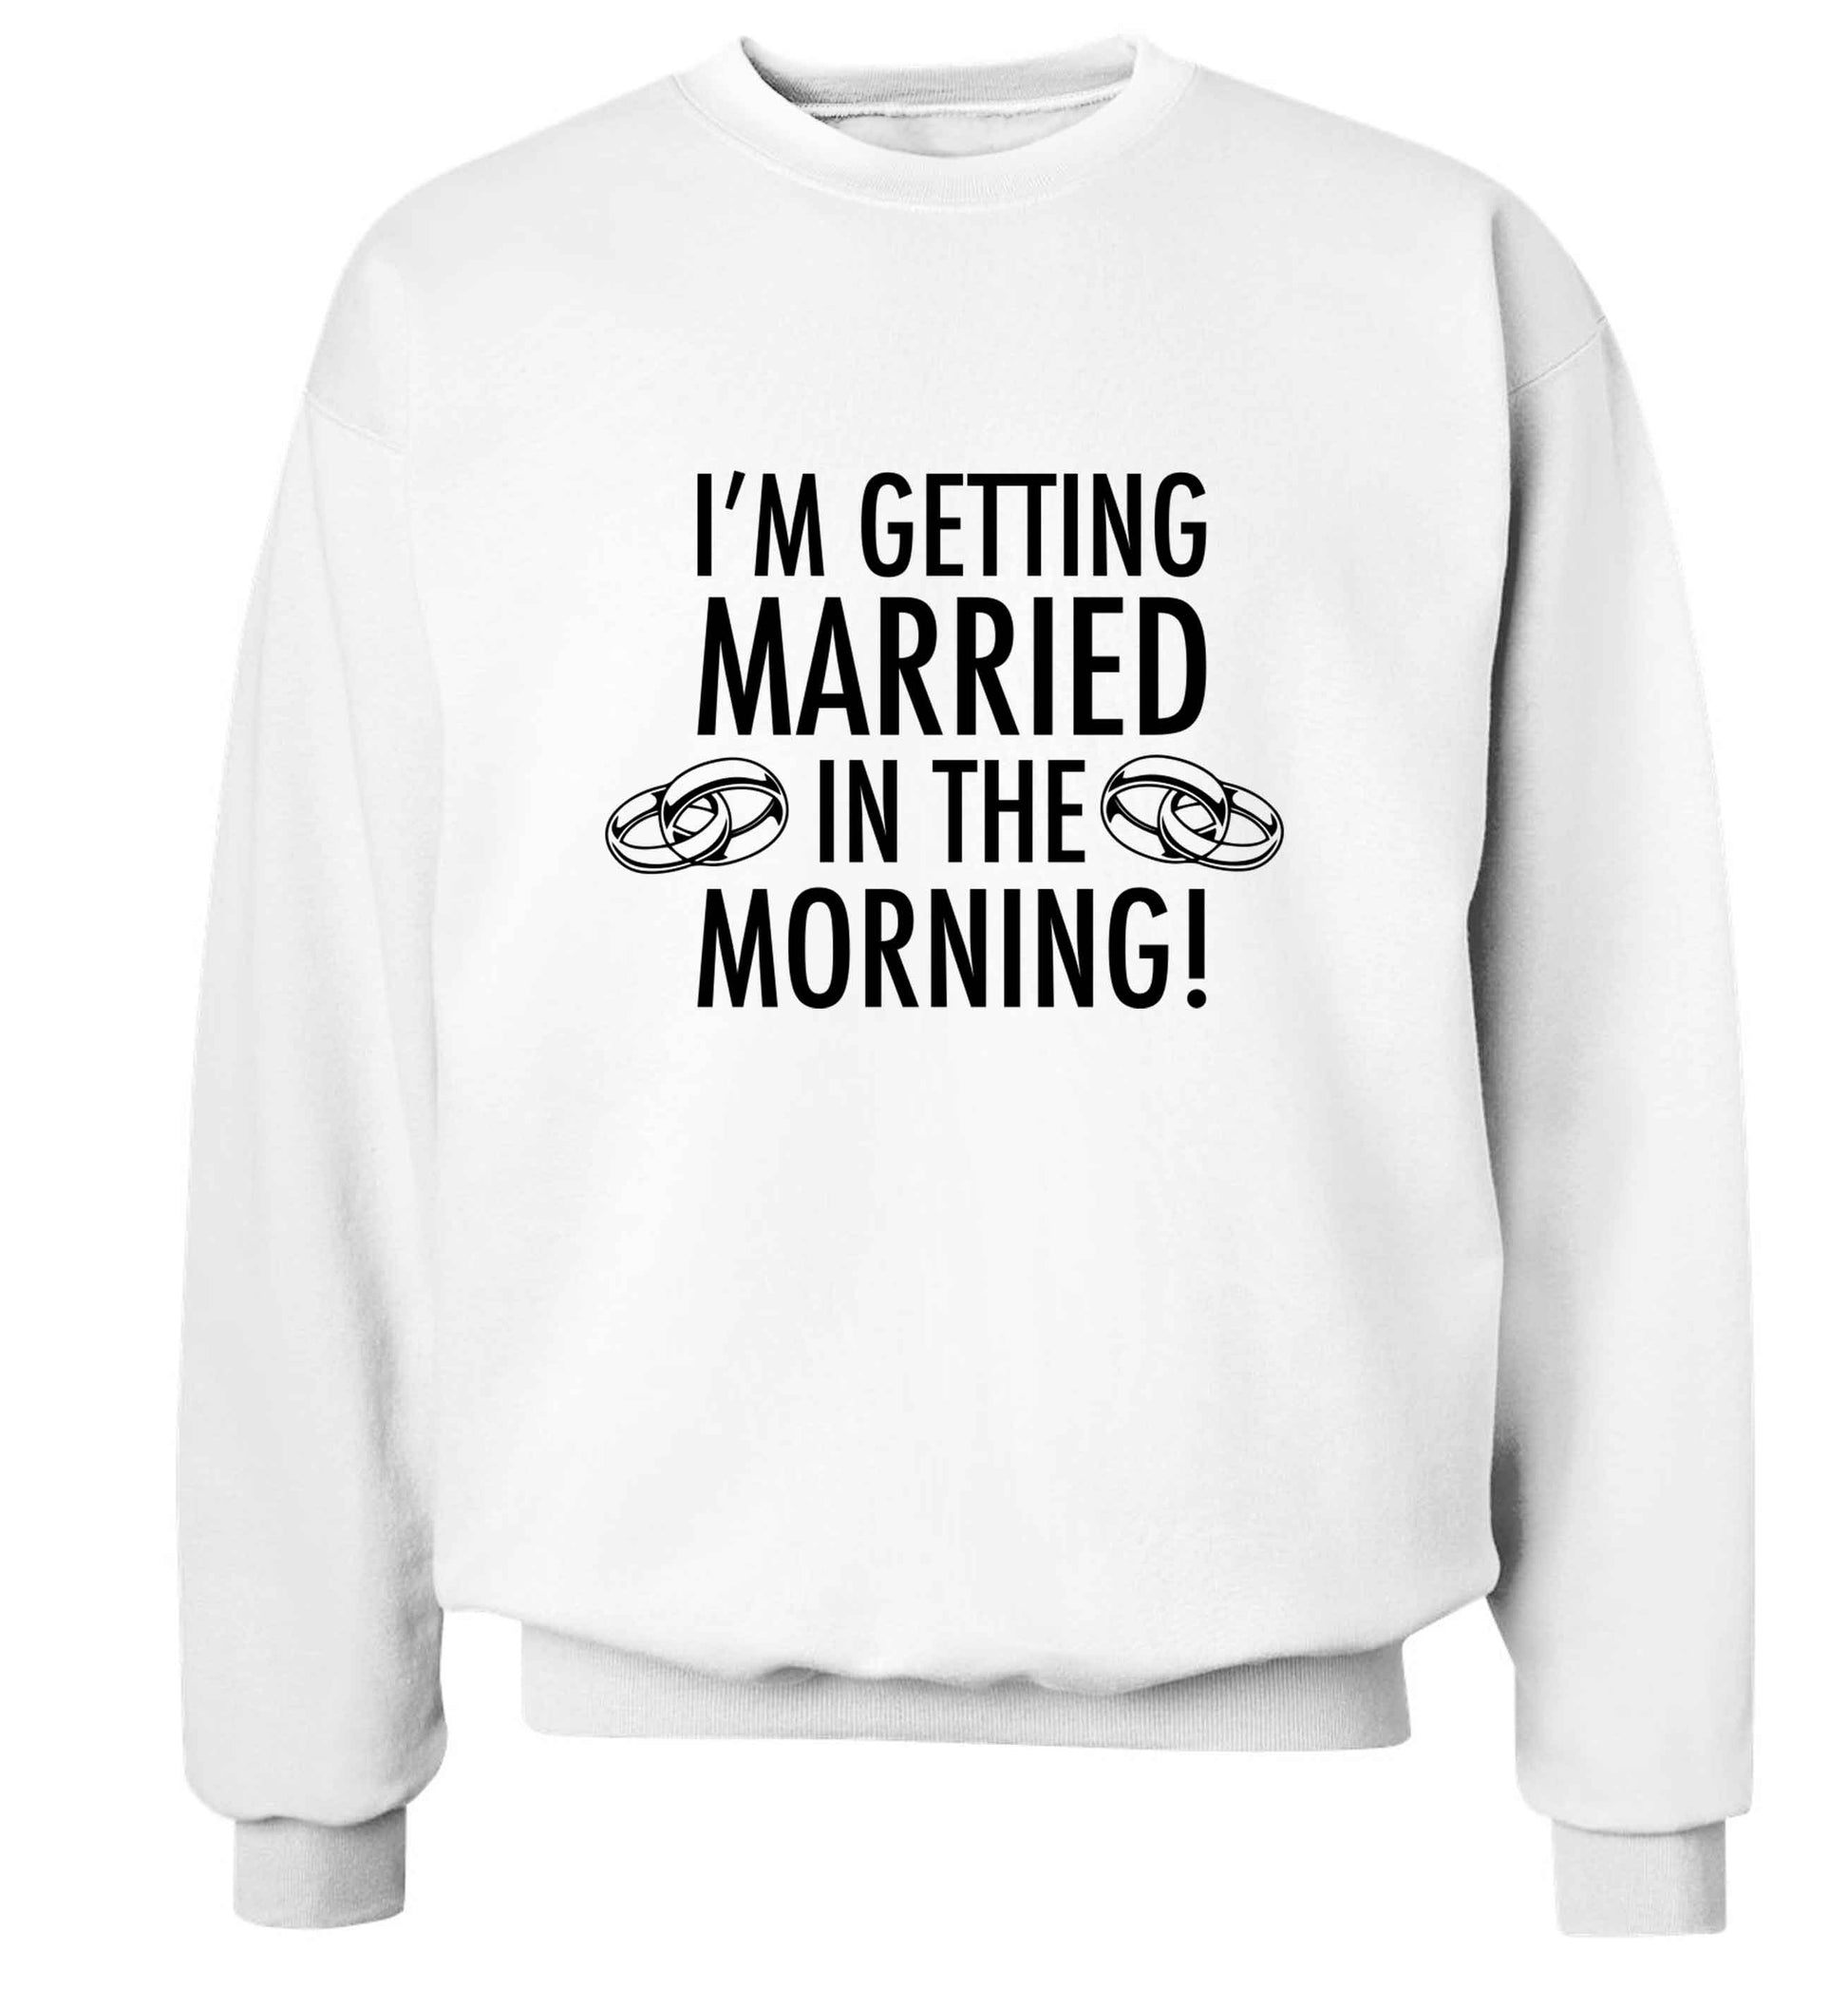 I'm getting married in the morning! adult's unisex white sweater 2XL